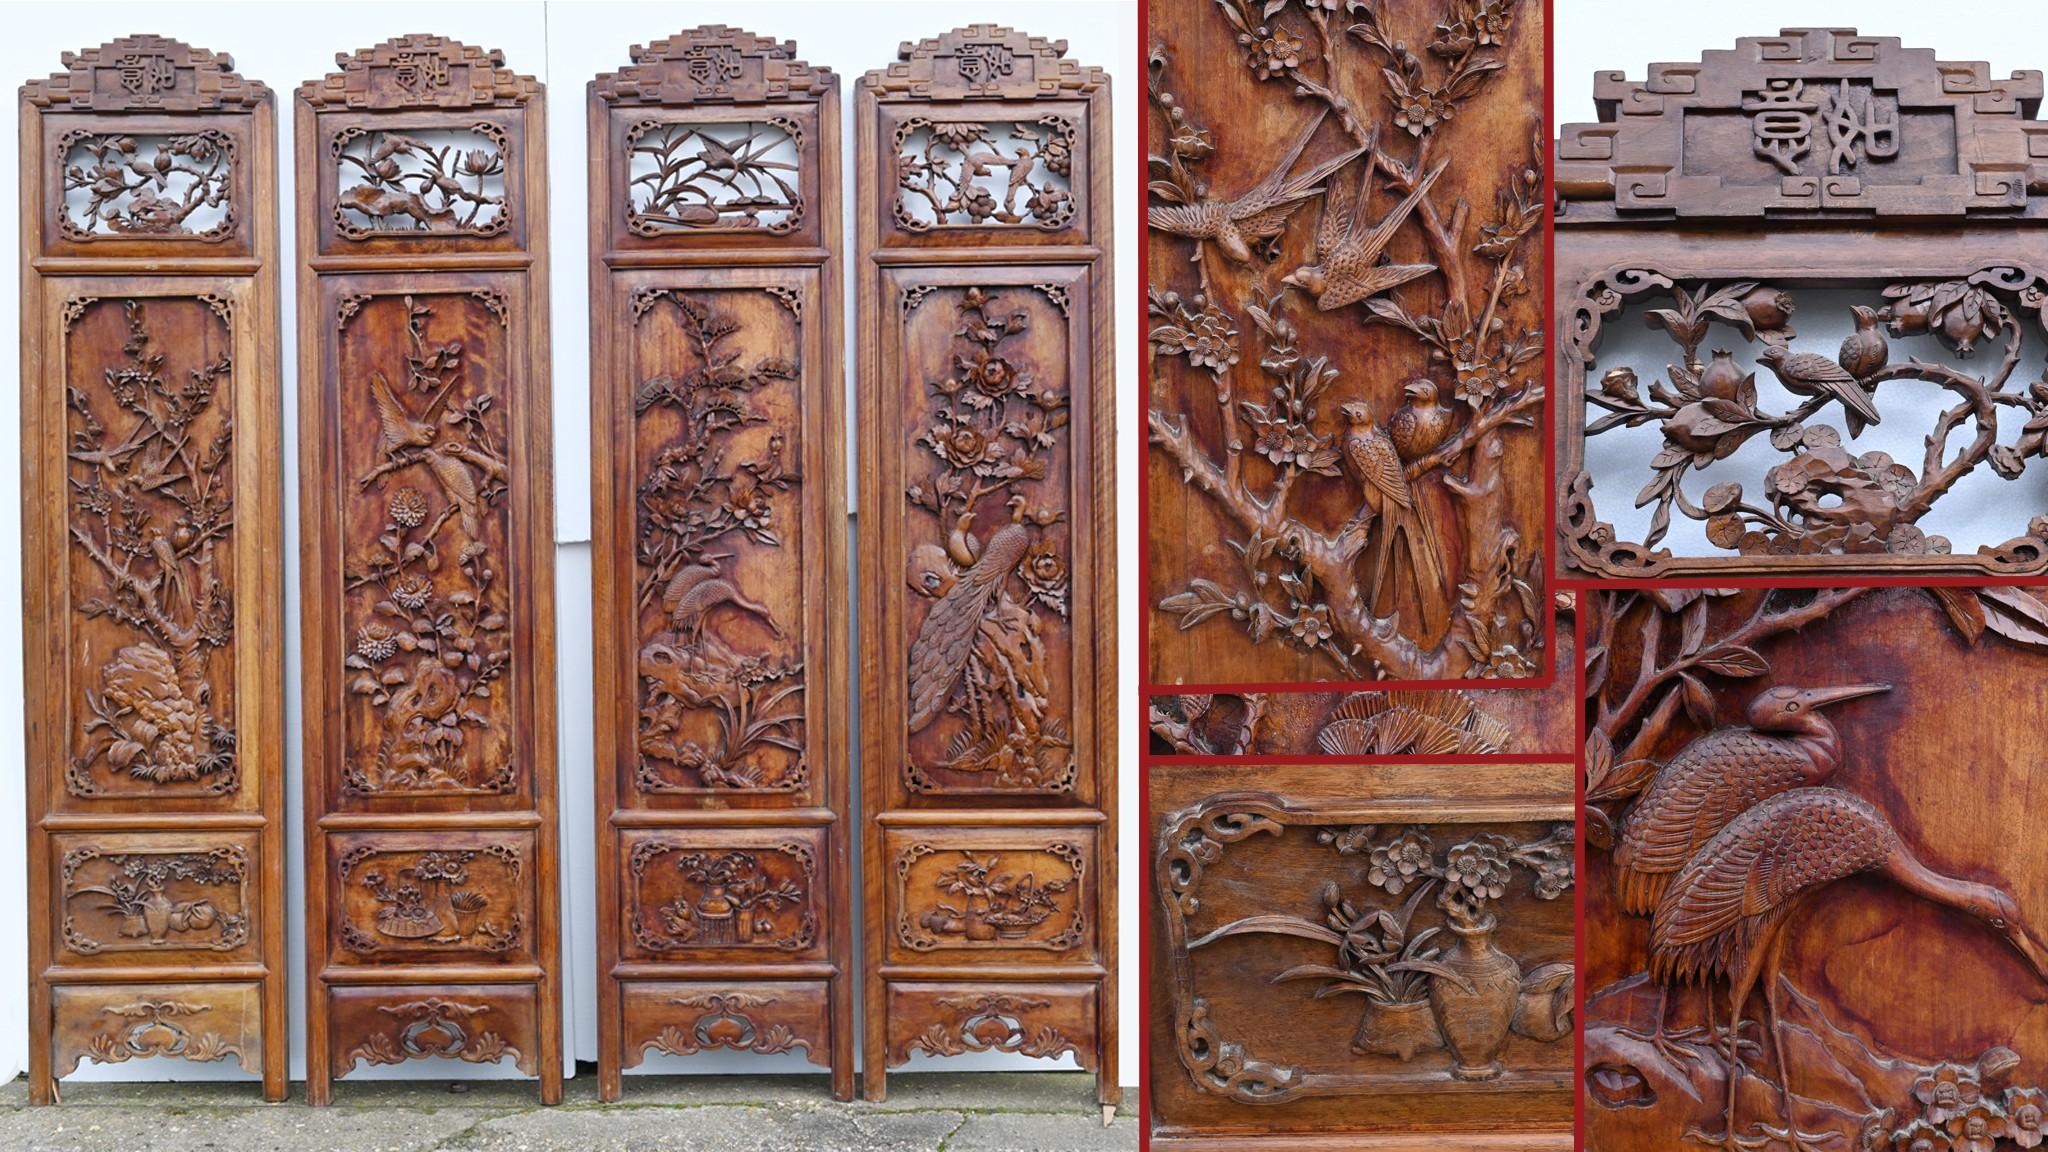 Gorgeous set of four hand carved Chinese screens
These were originally part of a screen or room divider and could be put back together to serve that purpose if required
Good size at almost seven feet all - 208 CM
Just look at all the details and